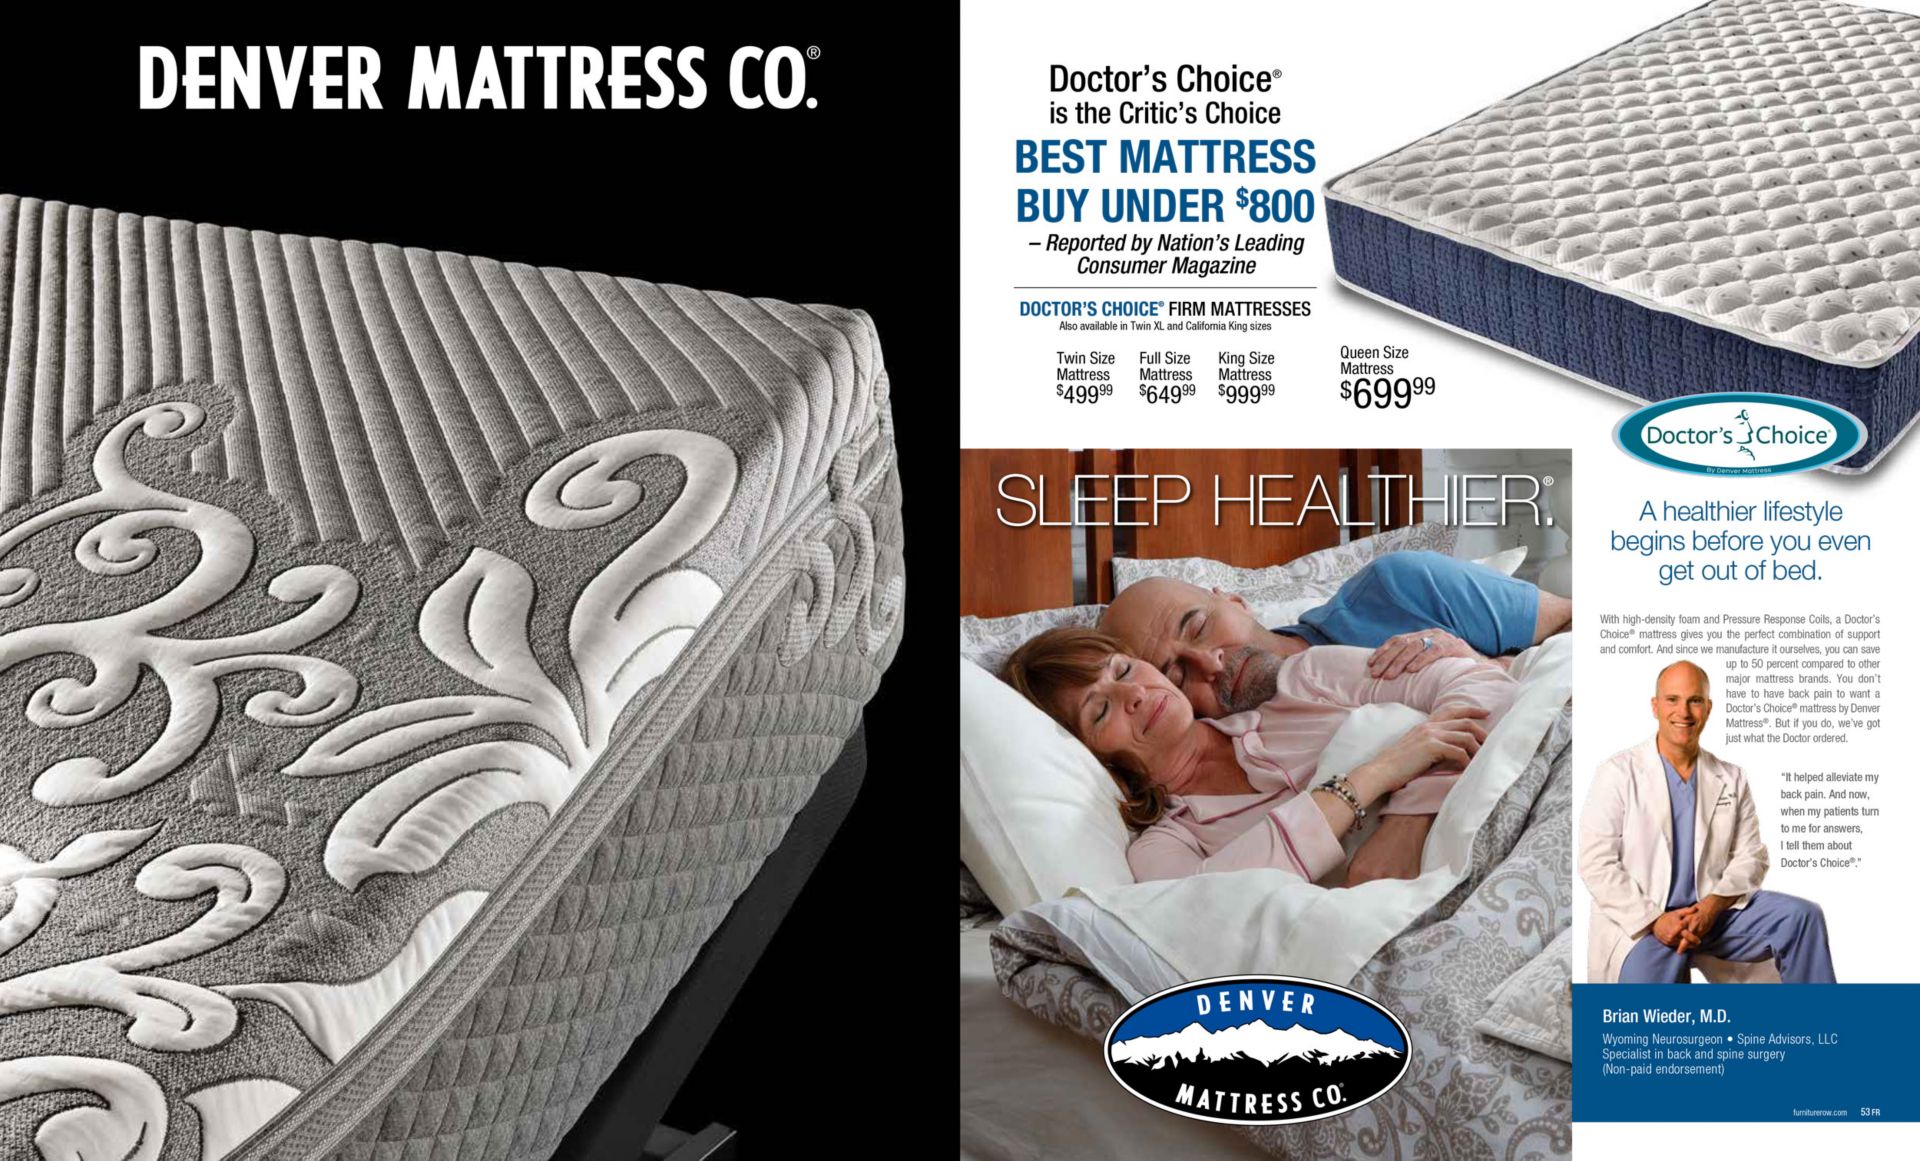 Denver Mattress. Sleep Healthier. Doctor’s Choice® is the Critic’s Choice BEST MATTRESS BUY UNDER $800 – Reported by Nation’s Leading Consumer Magazine. DOCTOR’S CHOICE® FIRM MATTRESSES Queen Size Mattress $699.99 Twin Size Mattress $499.99 Full Size Mattress $649.99 King Size Mattress $999.99 Also available in Twin XL and California King sizes. Queen Size Mattress $699.99. A healthier lifestyle begins before you even get out of bed. With high-density foam and Pressure Response Coils, a Doctor’s Choice® mattress gives you the perfect combination of support and comfort. And since we manufacture it ourselves, you can save up to 50 percent compared to other major mattress brands. You don’t have to have back pain to want a Doctor’s Choice® mattress by Denver Mattress®. But if you do, we’ve got just what the Doctor ordered. “It helped alleviate my back pain. And now, when my patients turn to me for answers, I tell them about Doctor’s Choice®.” Brian Wieder, M.D. Wyoming Neurosurgeon • Spine Advisors, LLC Specialist in back and spine surgery (Non-paid endorsement).